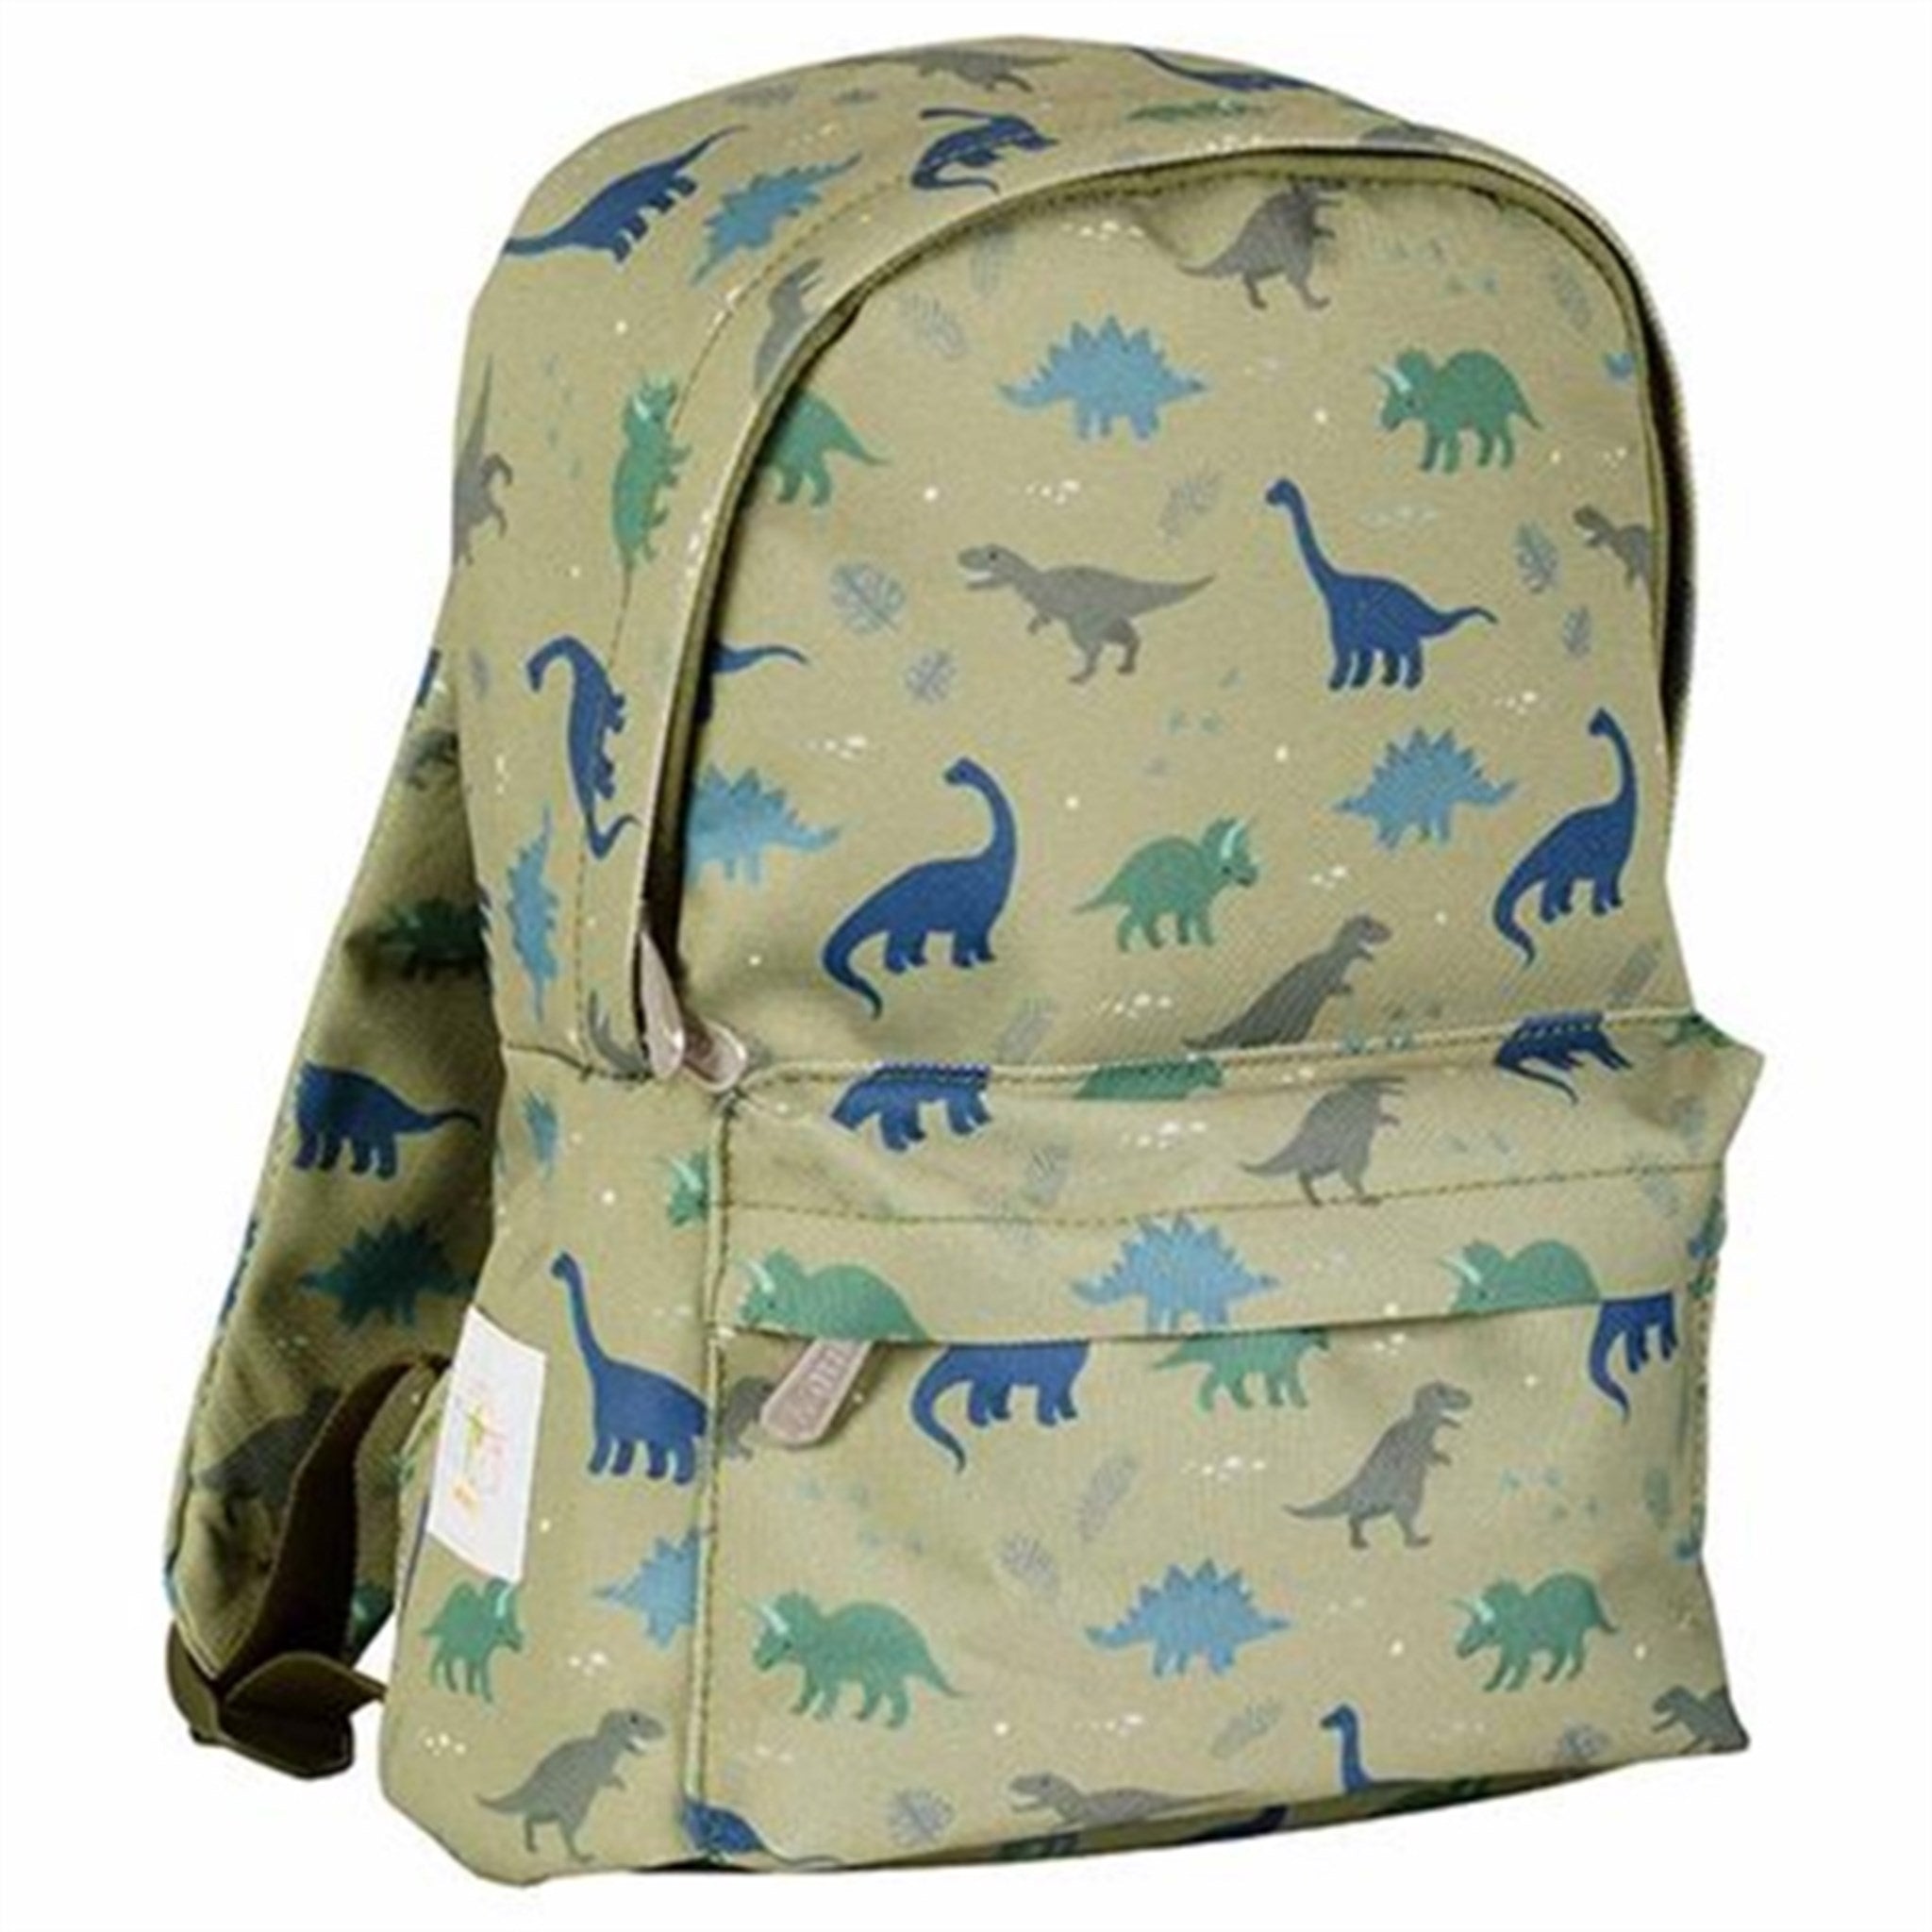 A Little Lovely Company Backpack Small Dinosaur 5